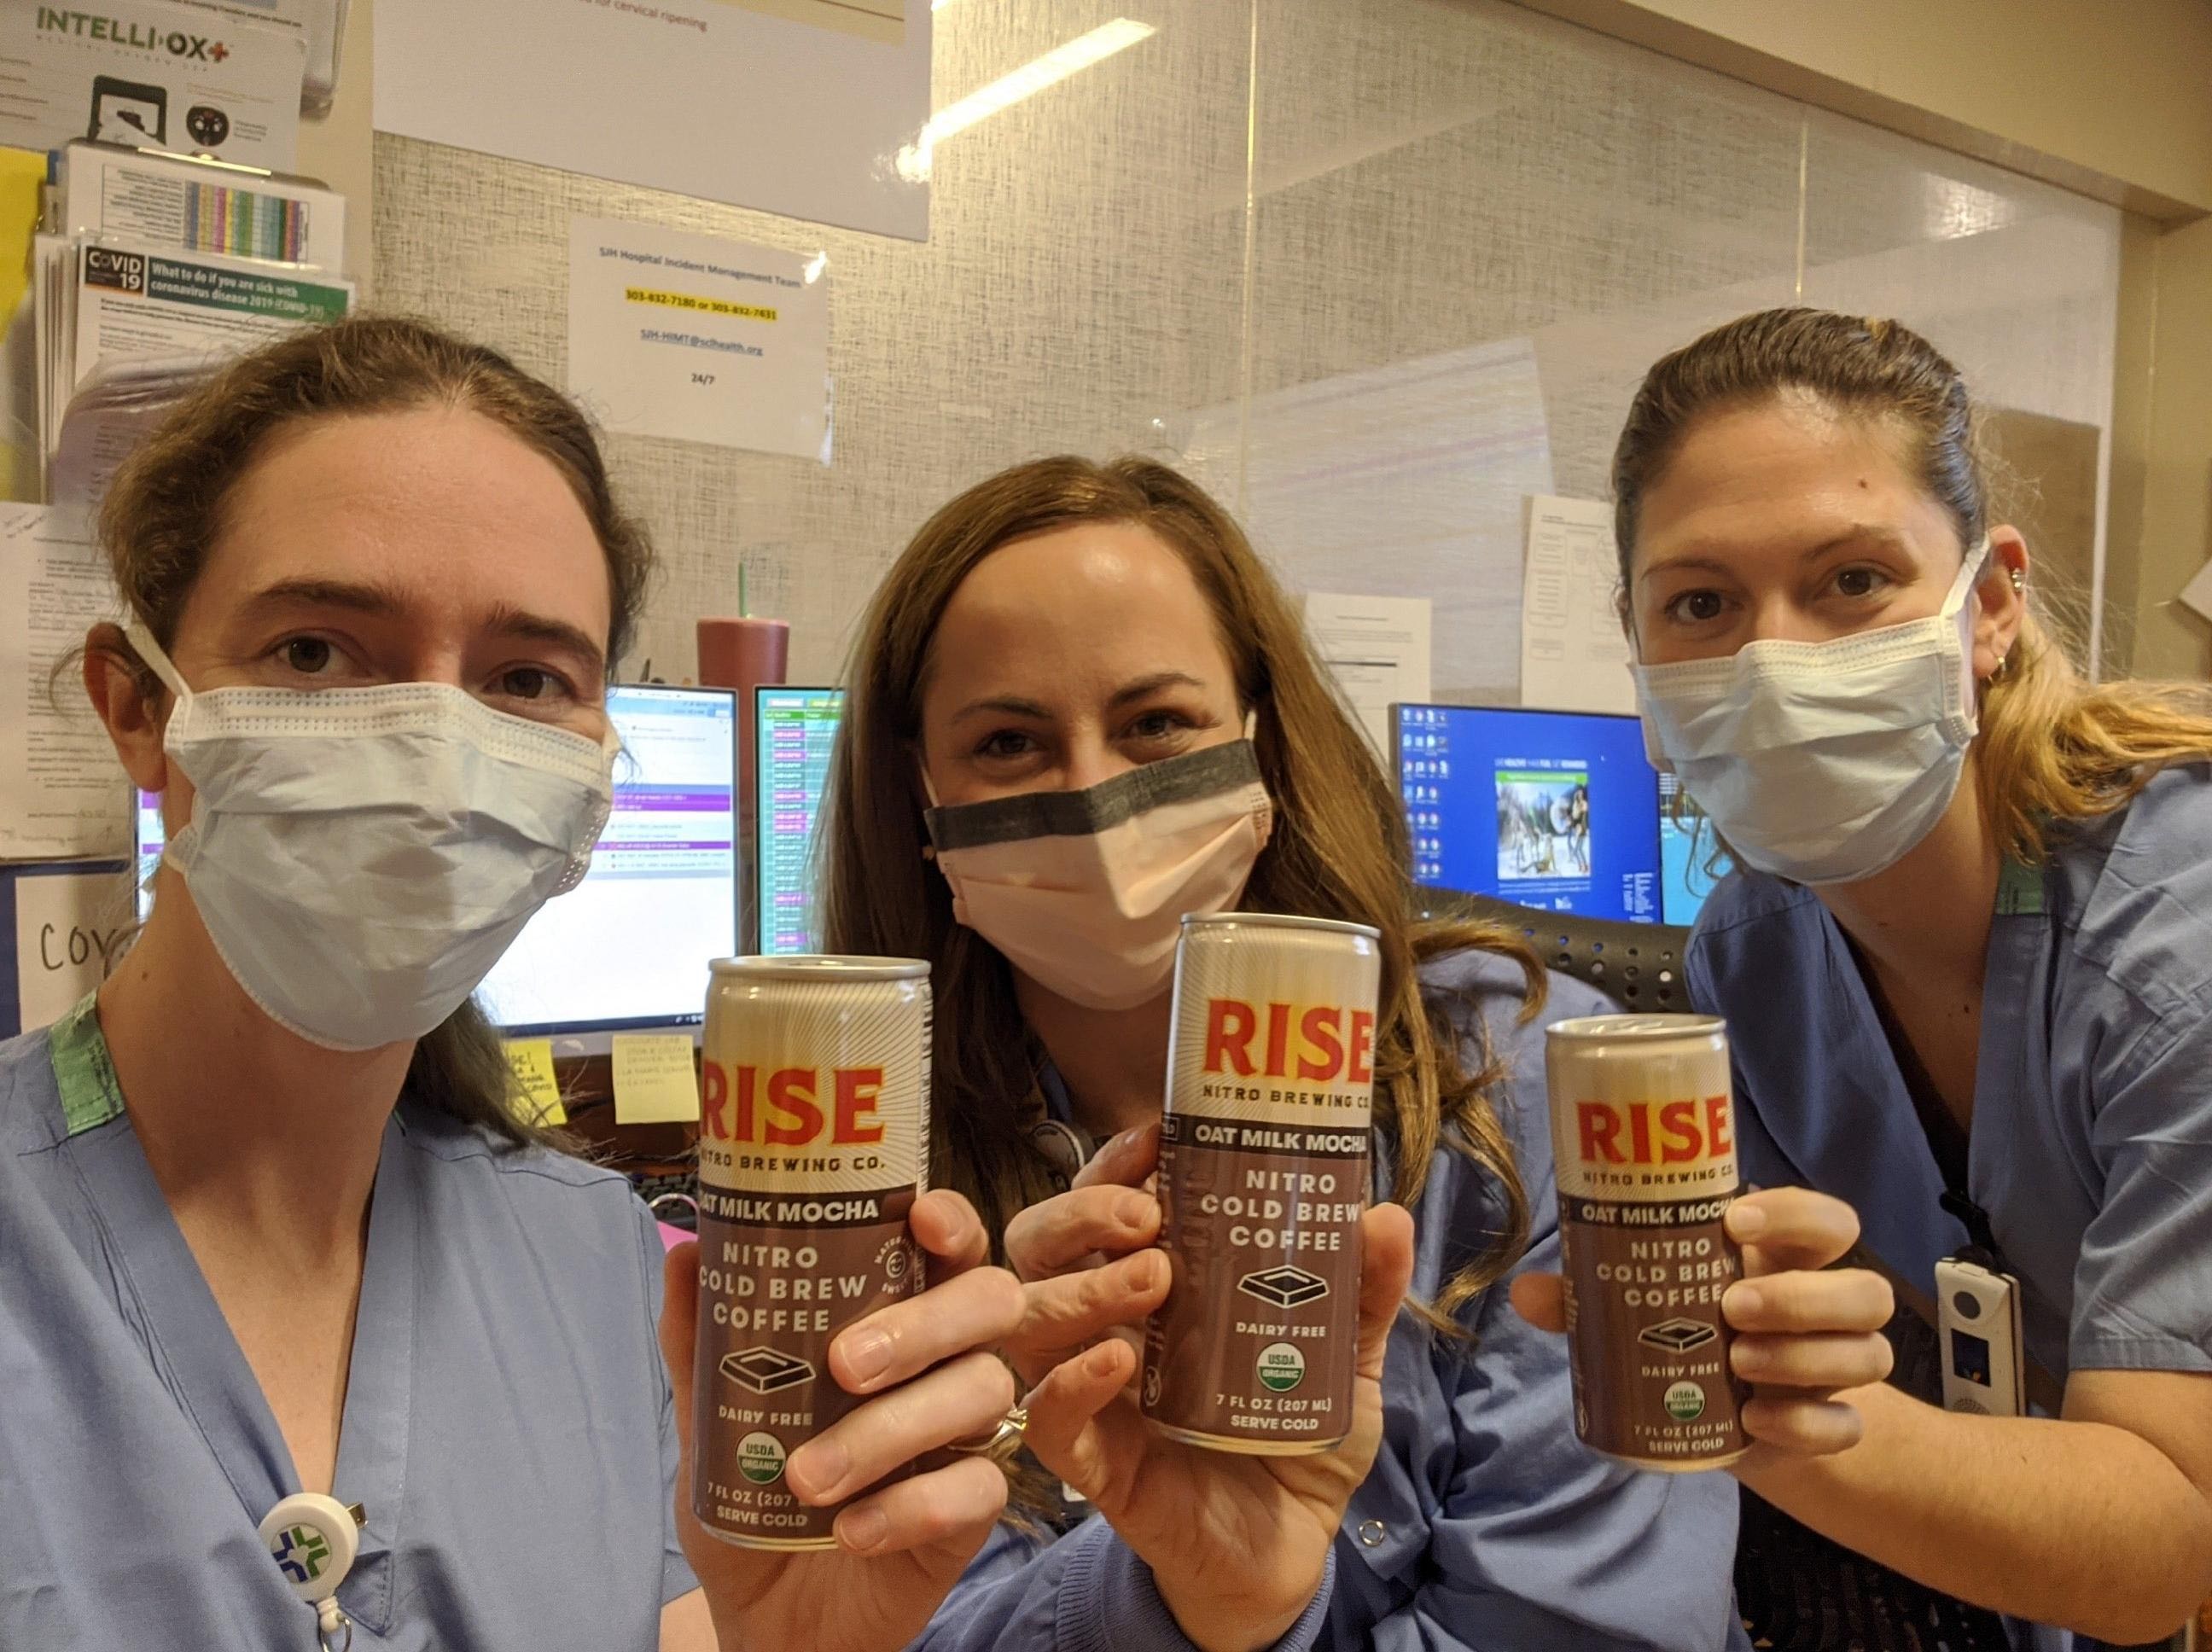 RISE Brewing Co. coffee for the healthcare heros